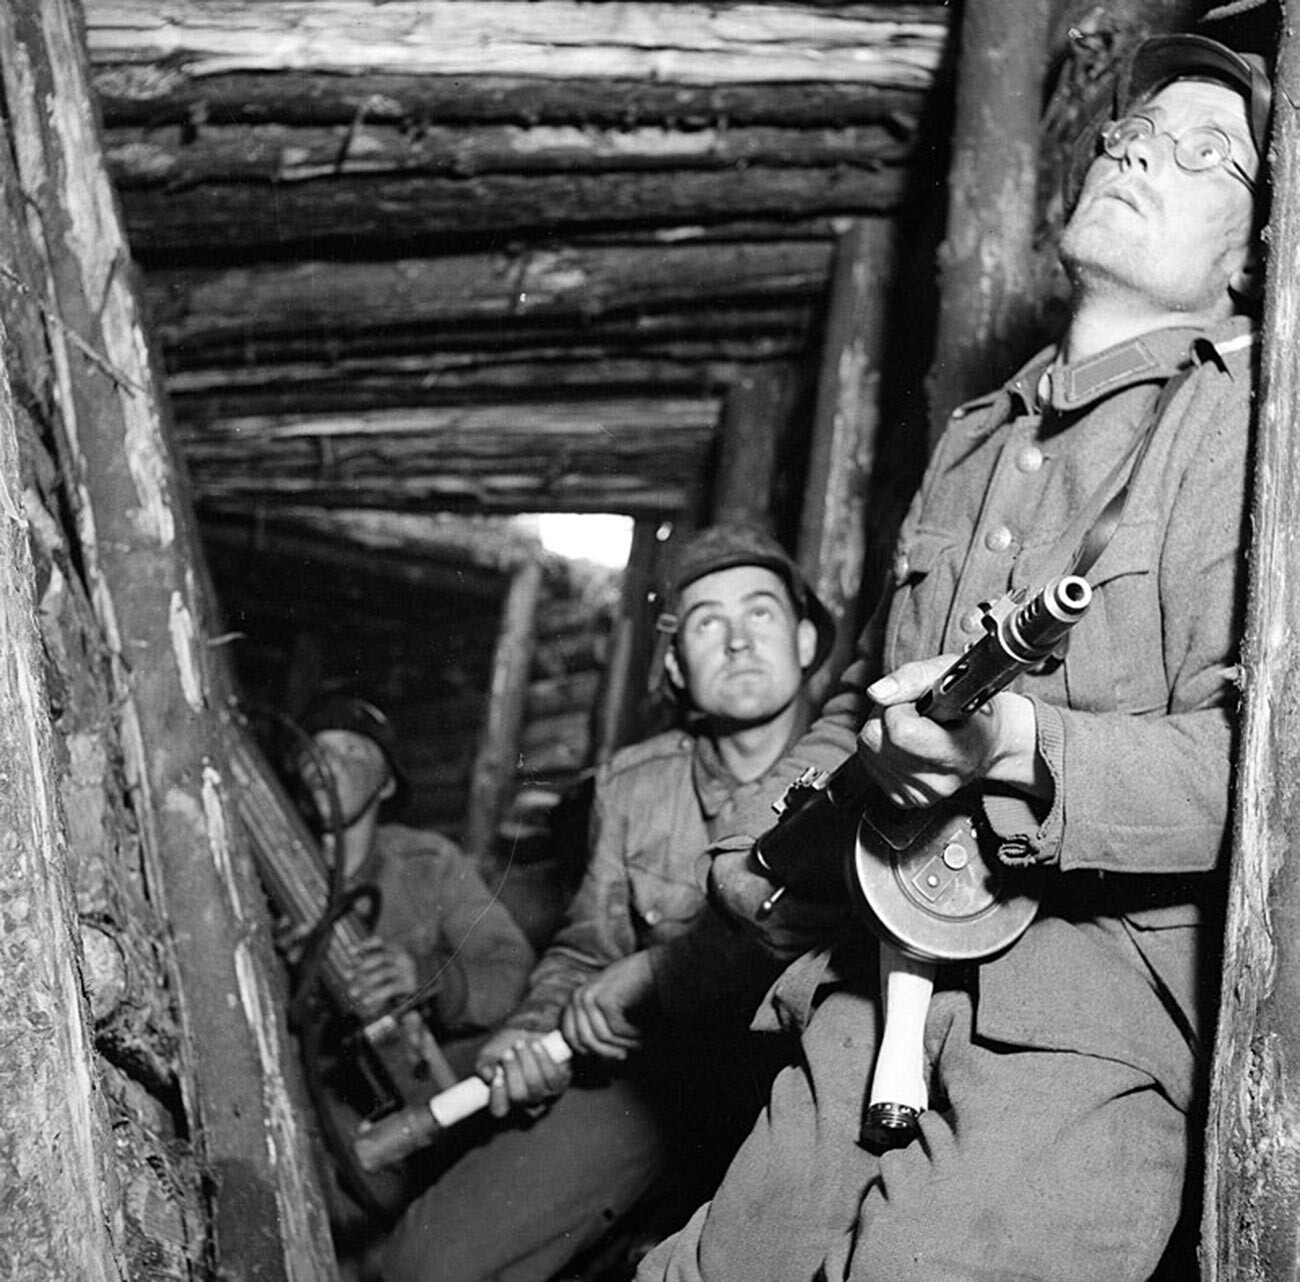 Finnish soldiers in a shelter during an alert.